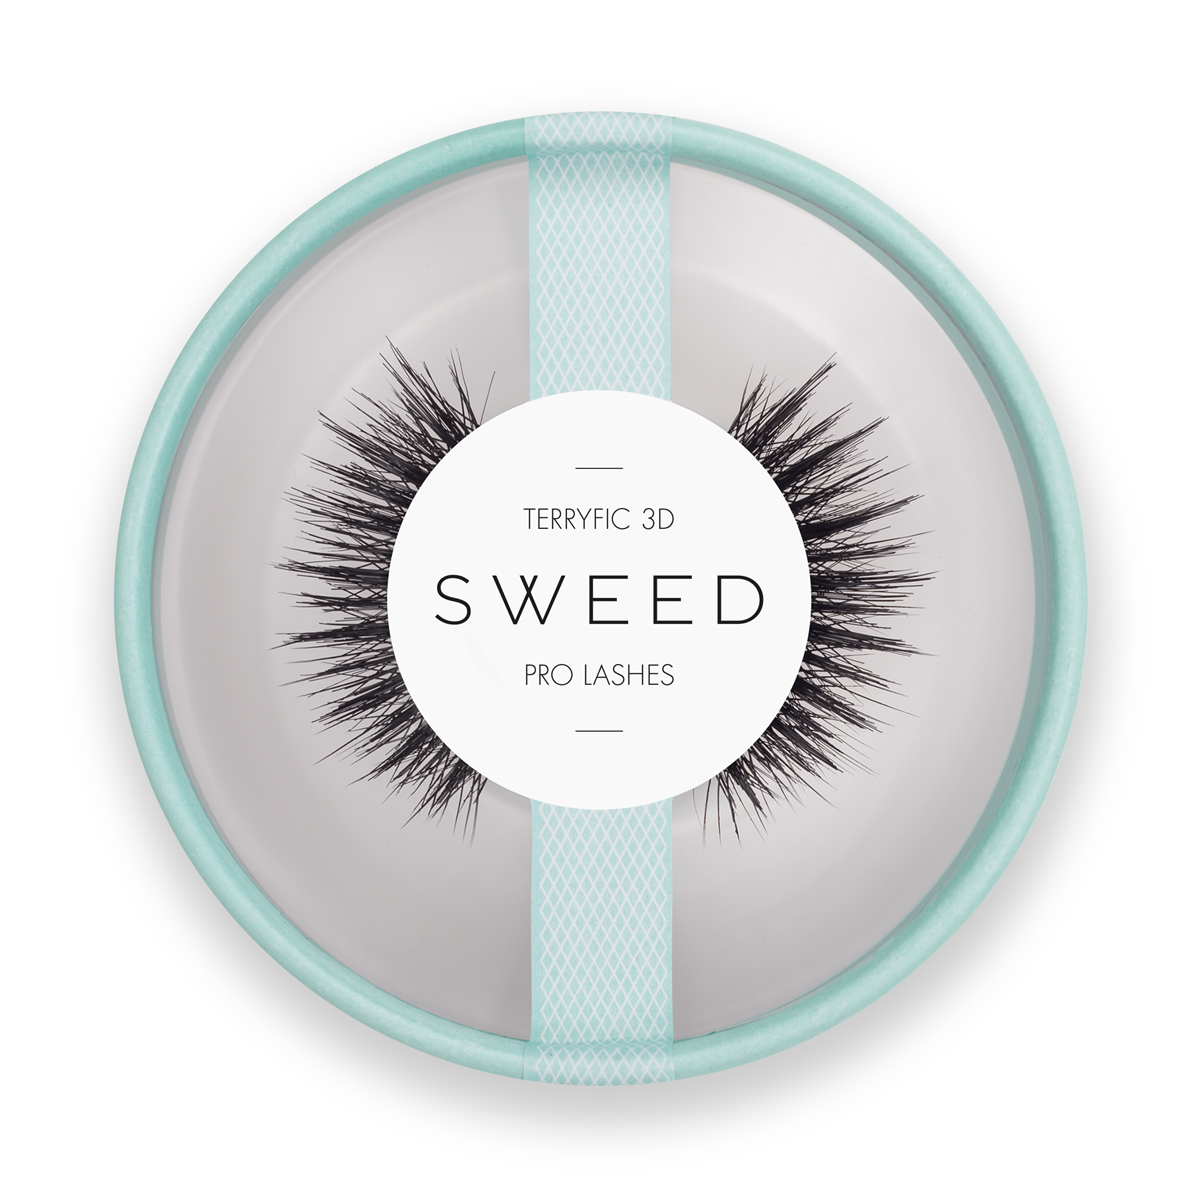 SWEED TERRYFIC 3D Lashes